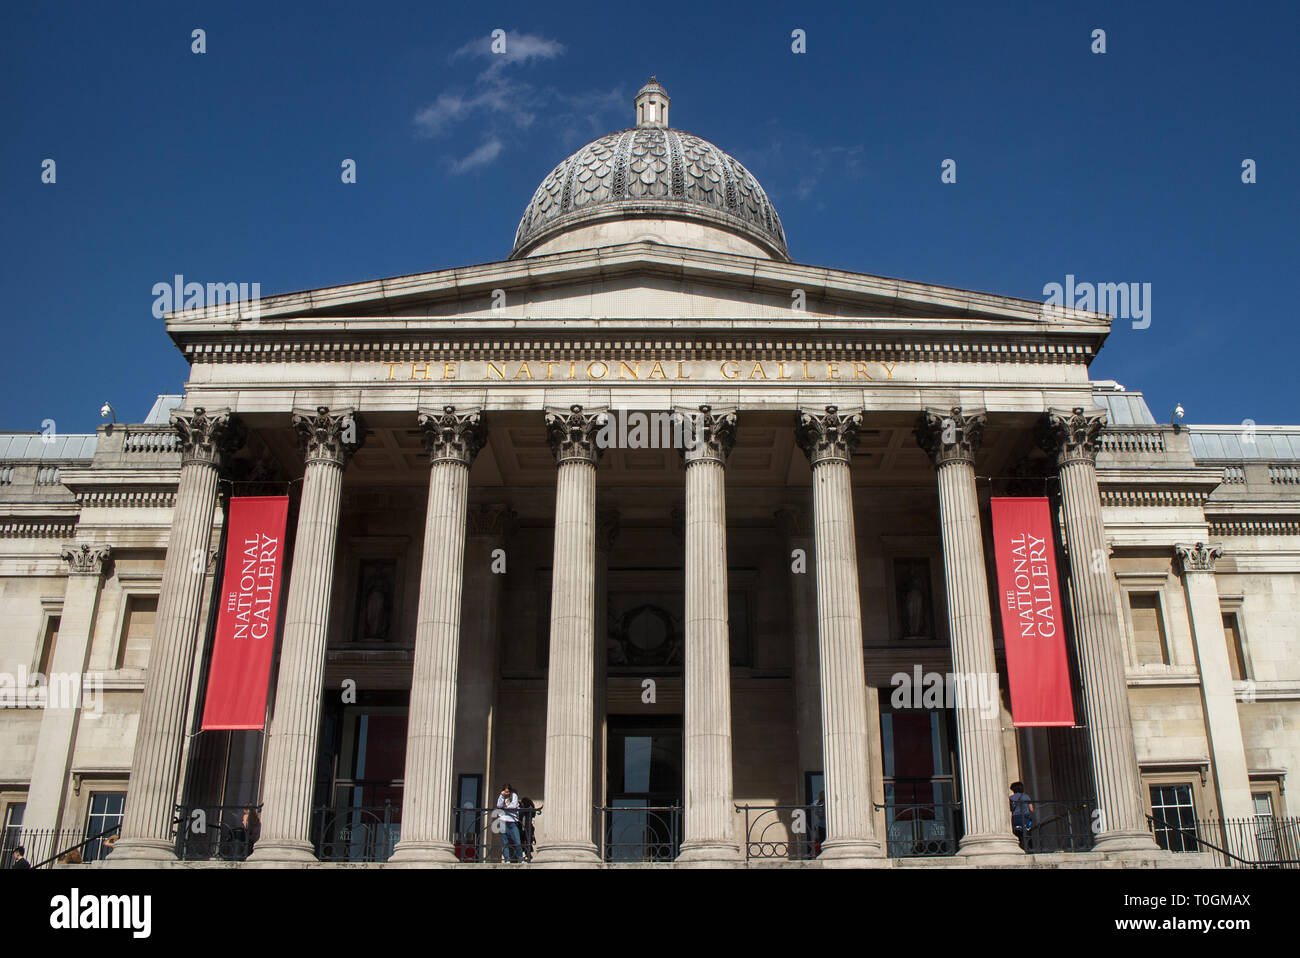 Main entrance of The National Gallery, London Stock Photo